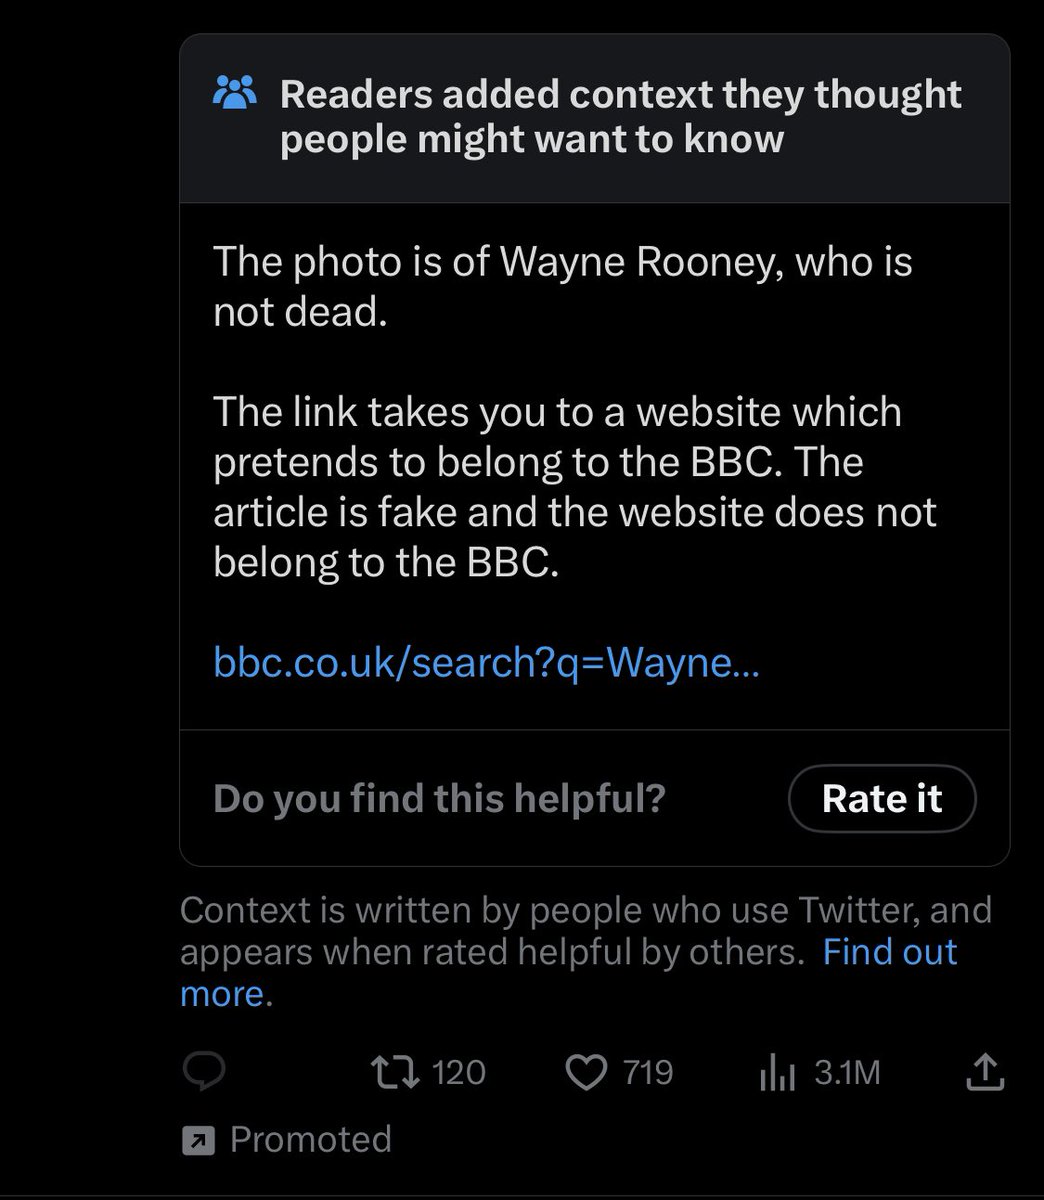 These incredibly misleading tweets that trade on the supposed deaths of celebrities / fake BBC websites - continue to proliferate on here with seemingly little sanction. But even worse - Twitter is making ££ out of them . Still being promoted into feeds.